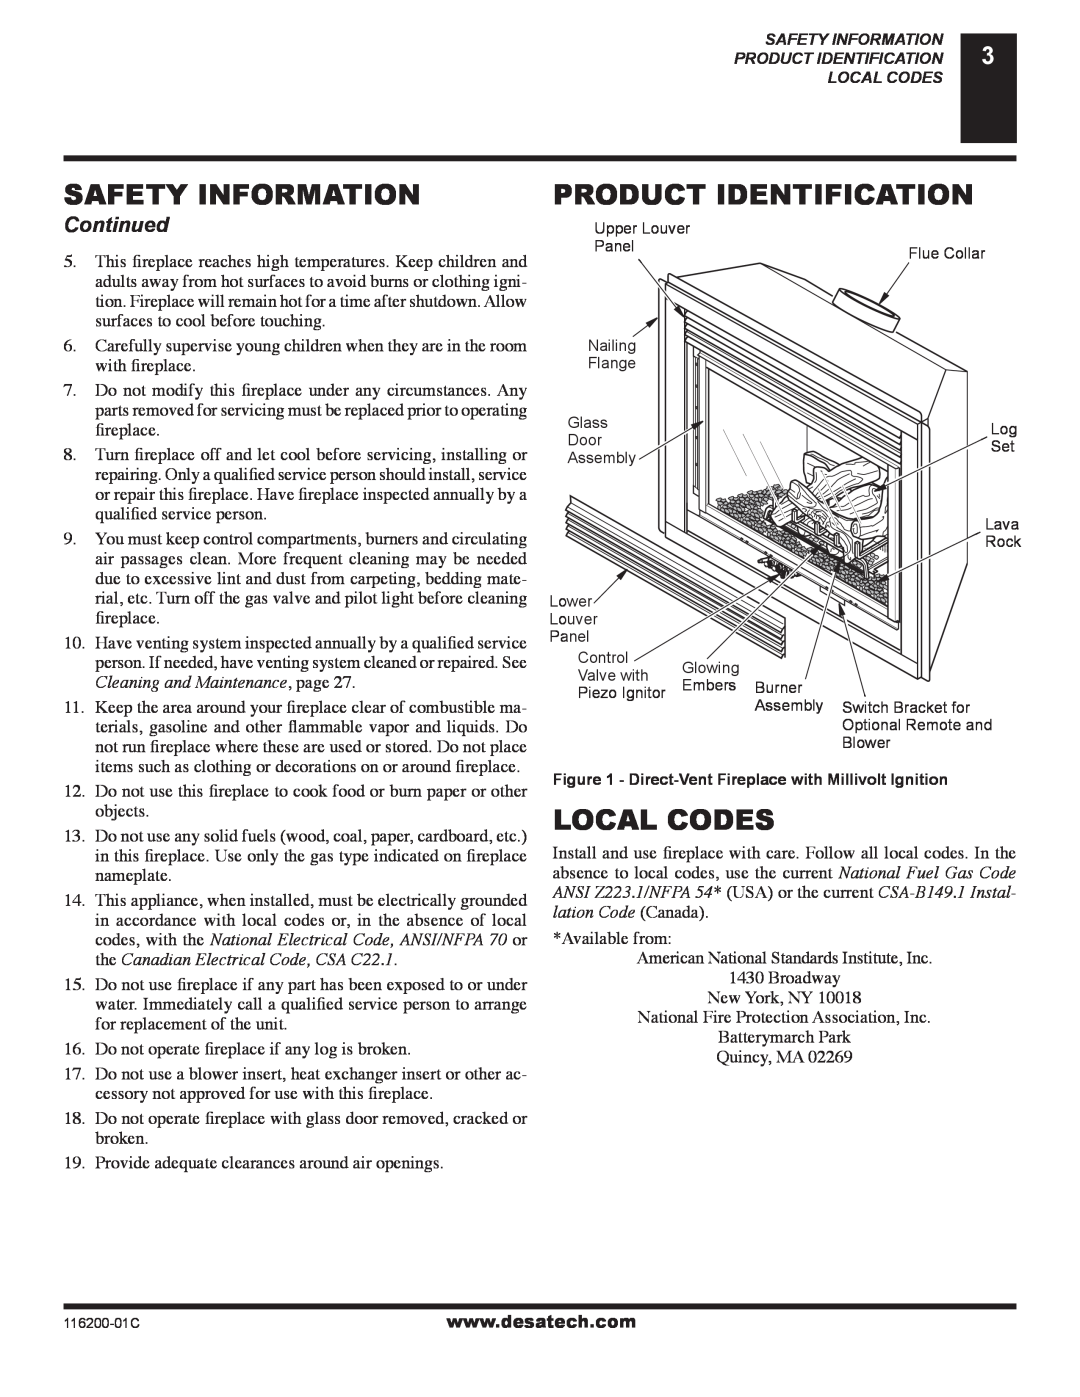 Desa CGCDV36NR Product Identification, Local Codes, Continued, Cleaning and Maintenance, page, Safety Information 